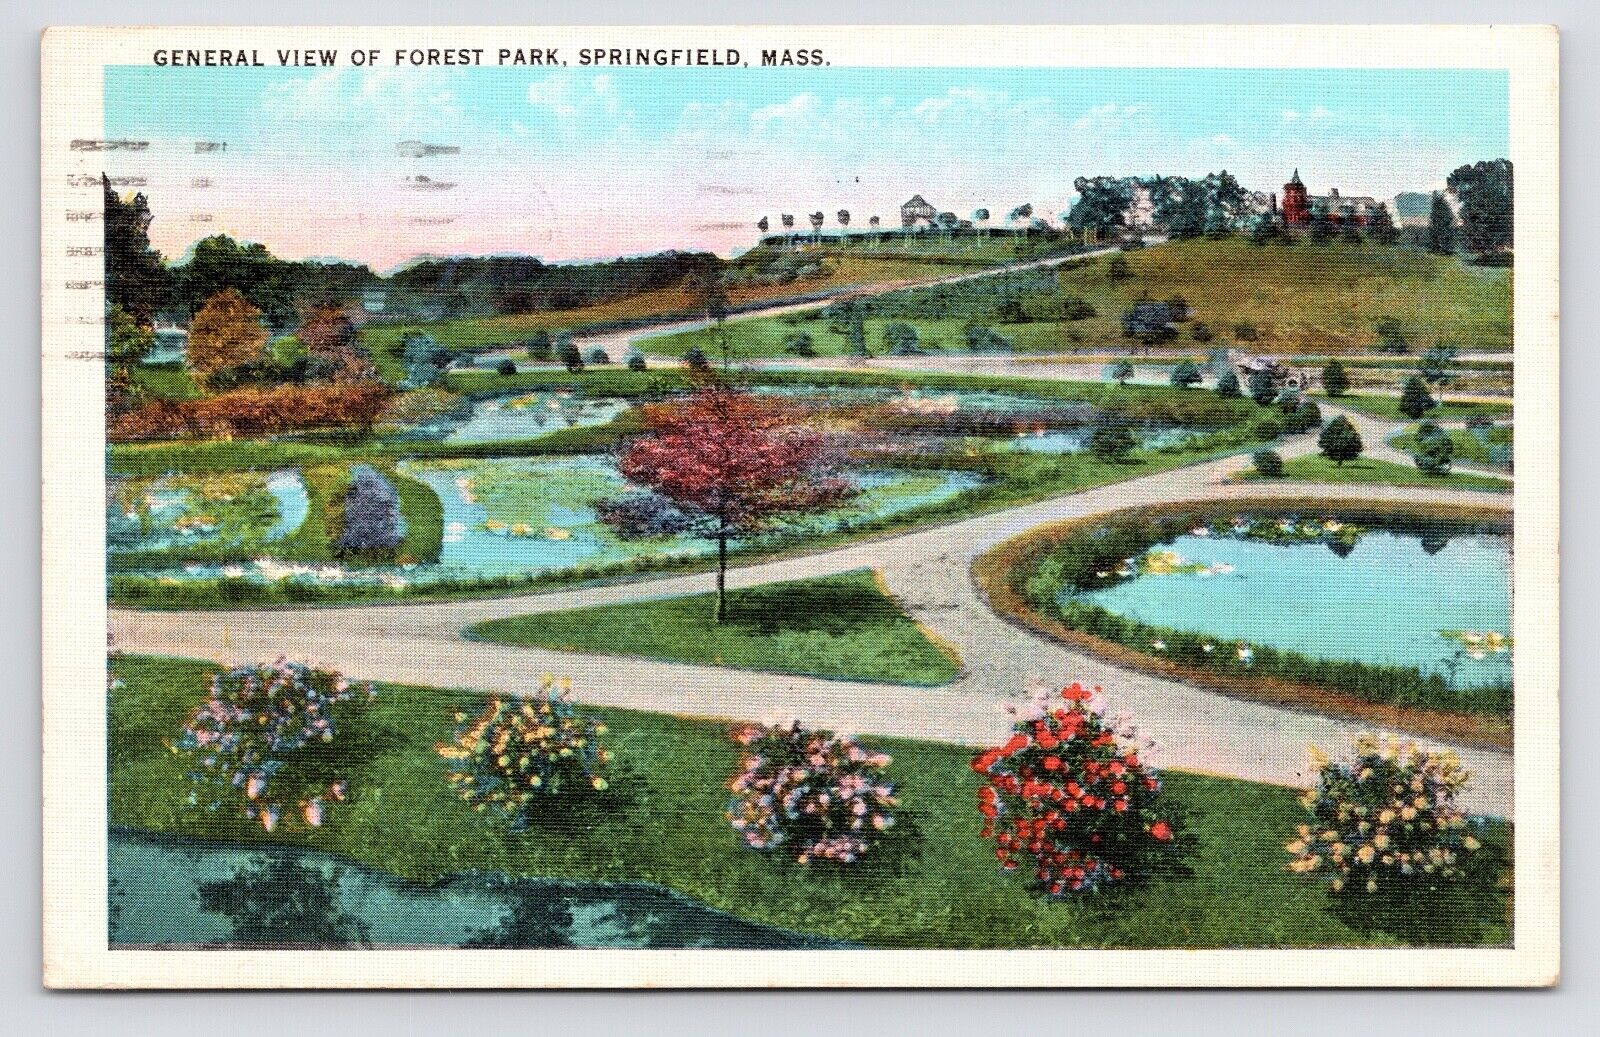 1930s General View Forest Park Ponds Paths Springfield Massachusetts MA Postcard